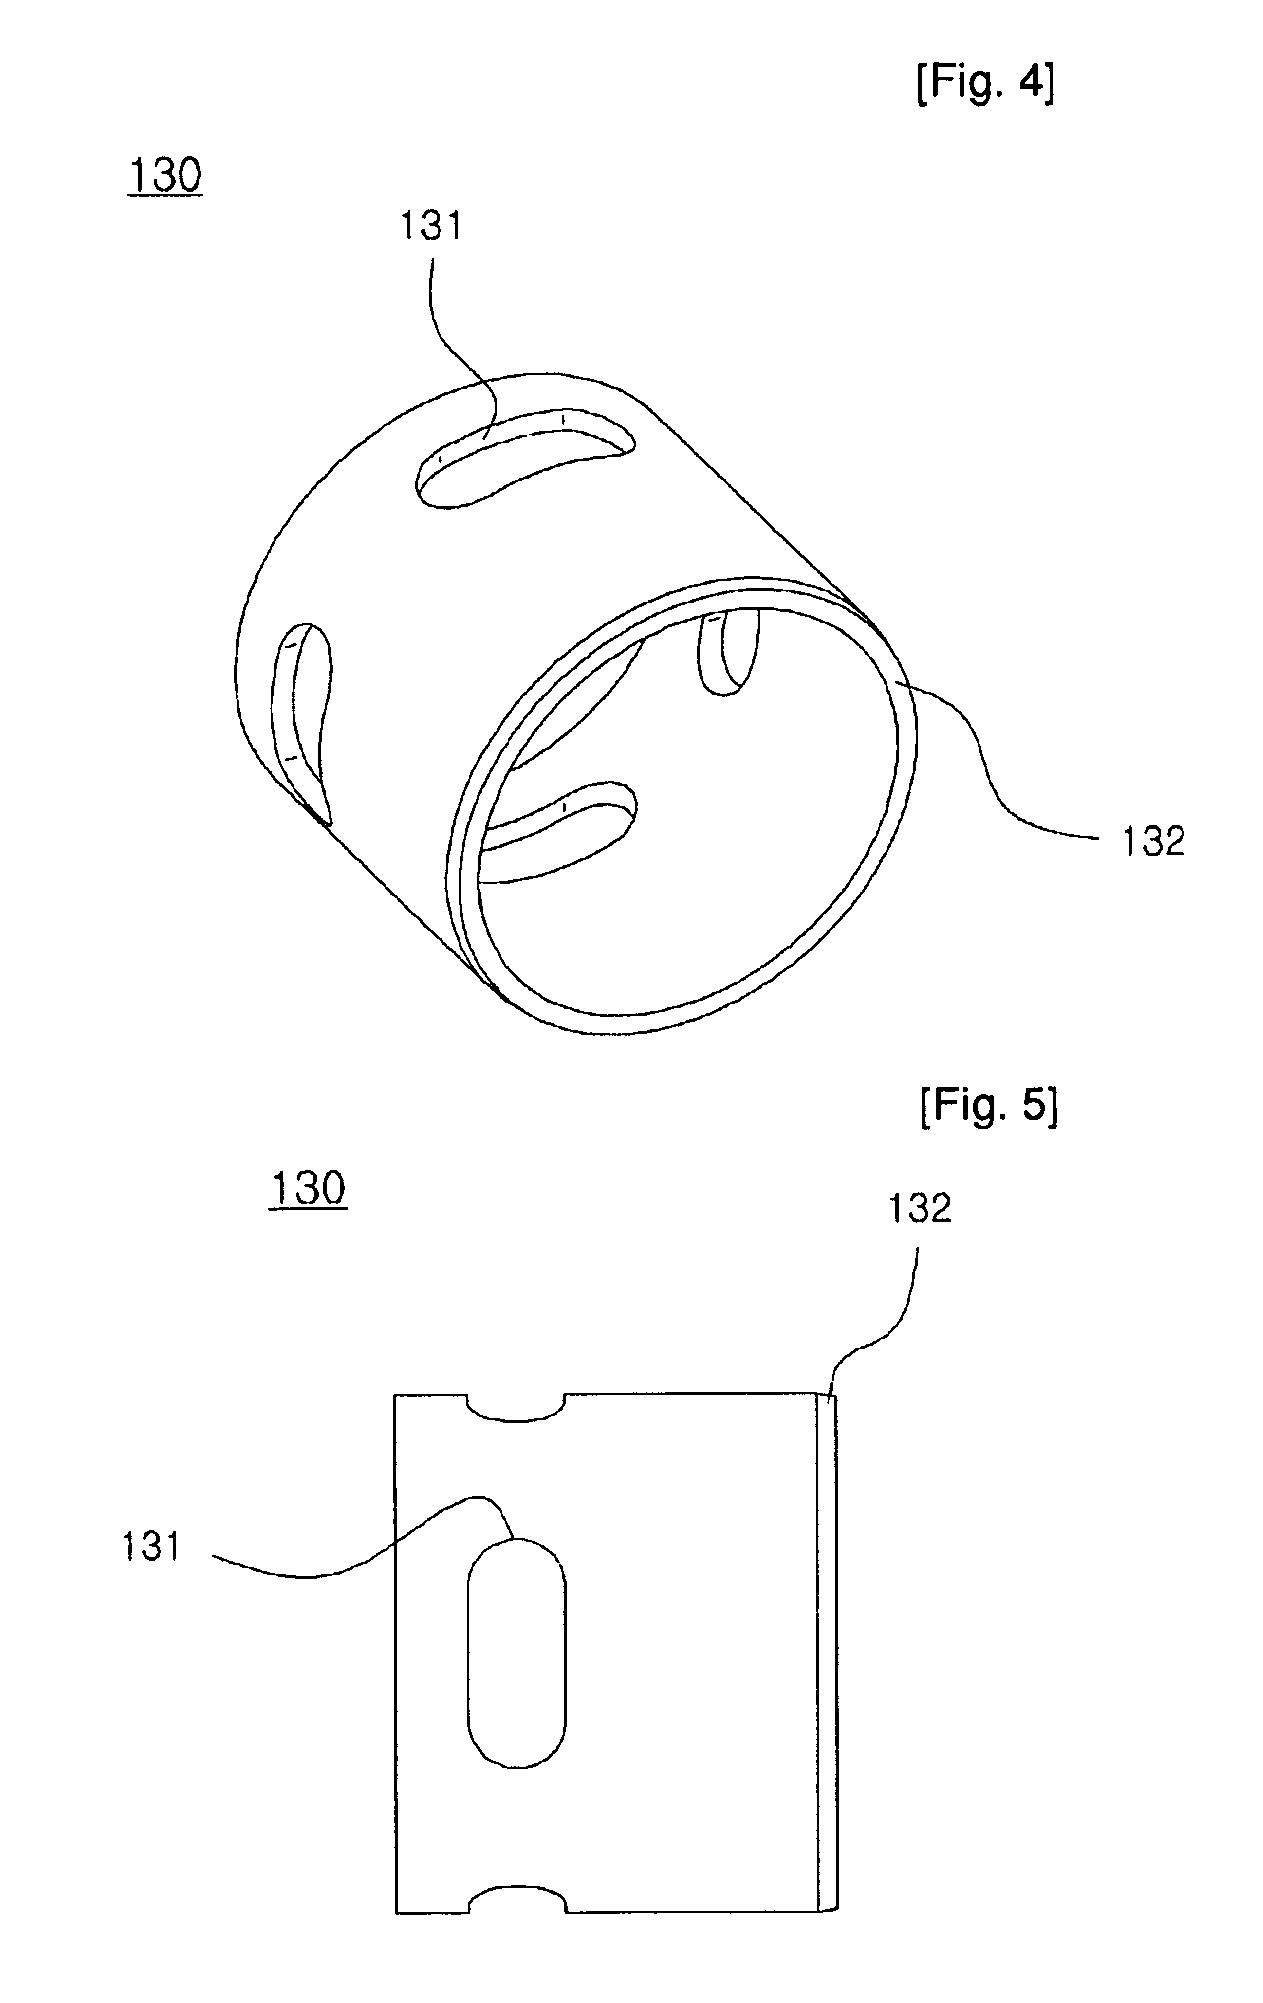 Torsion beam axle having connecting tube between torsion beam and trailing arm